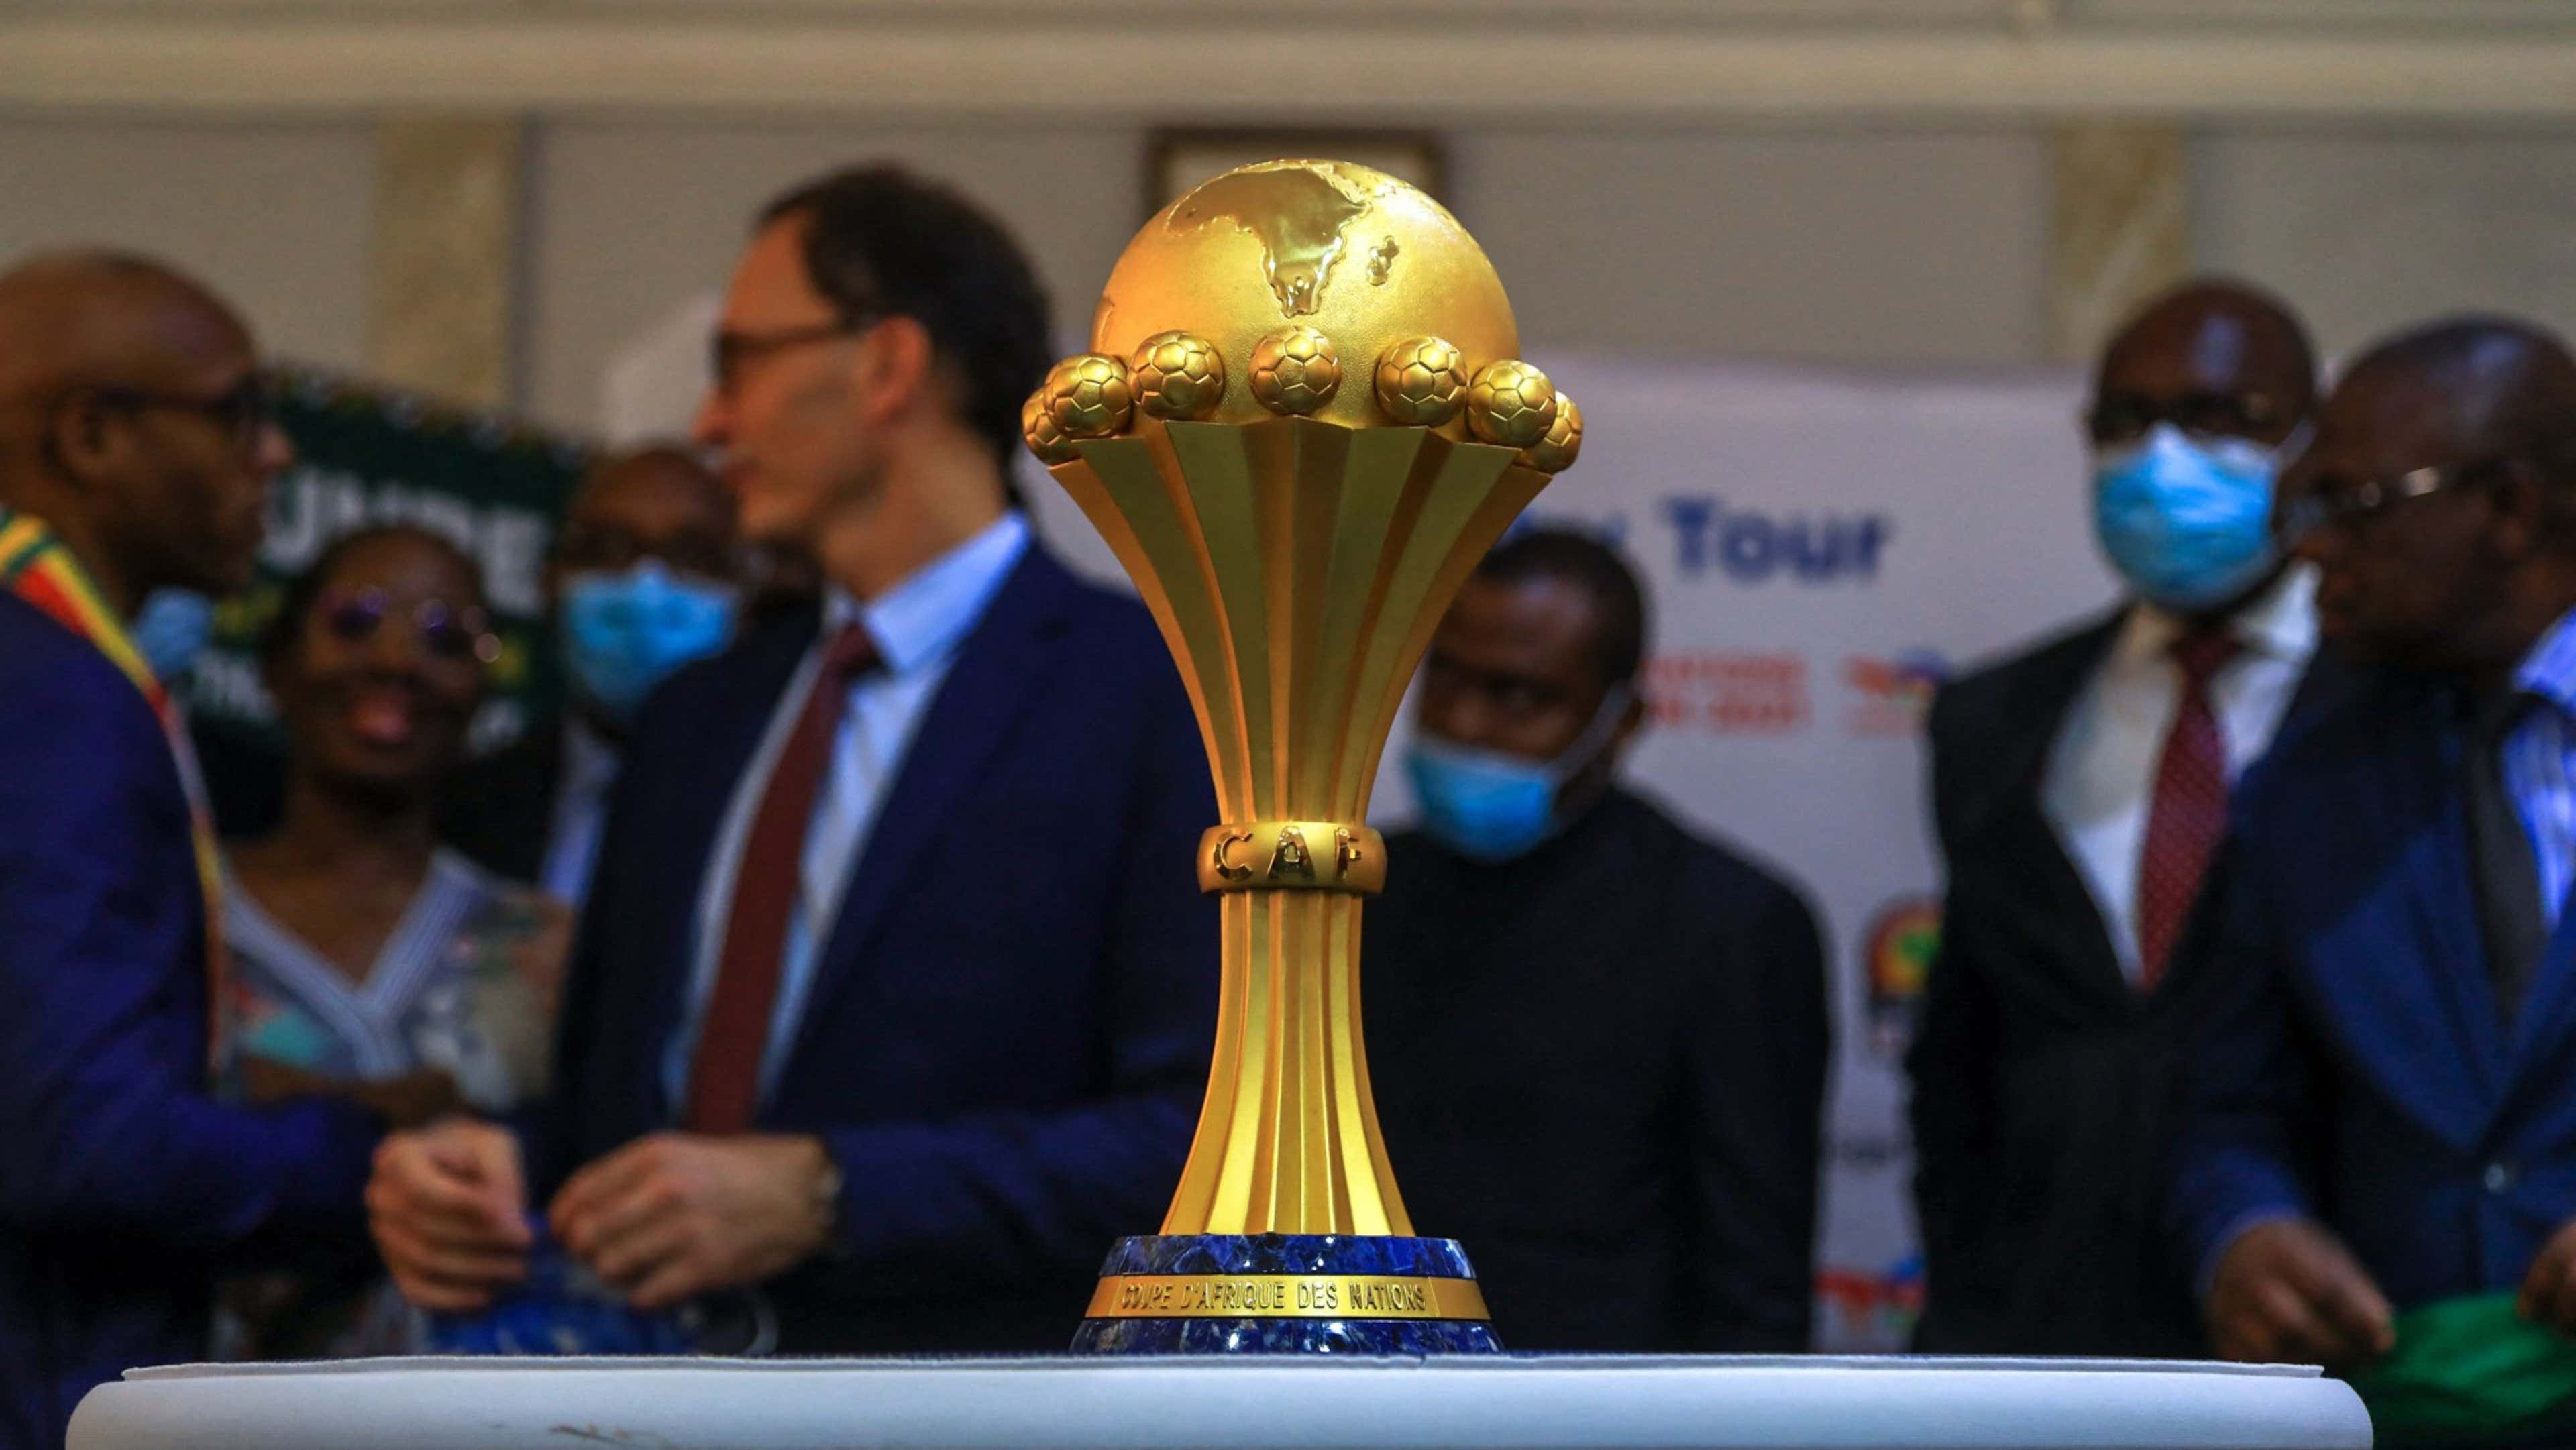 African Cup of Nations 2021 trophy